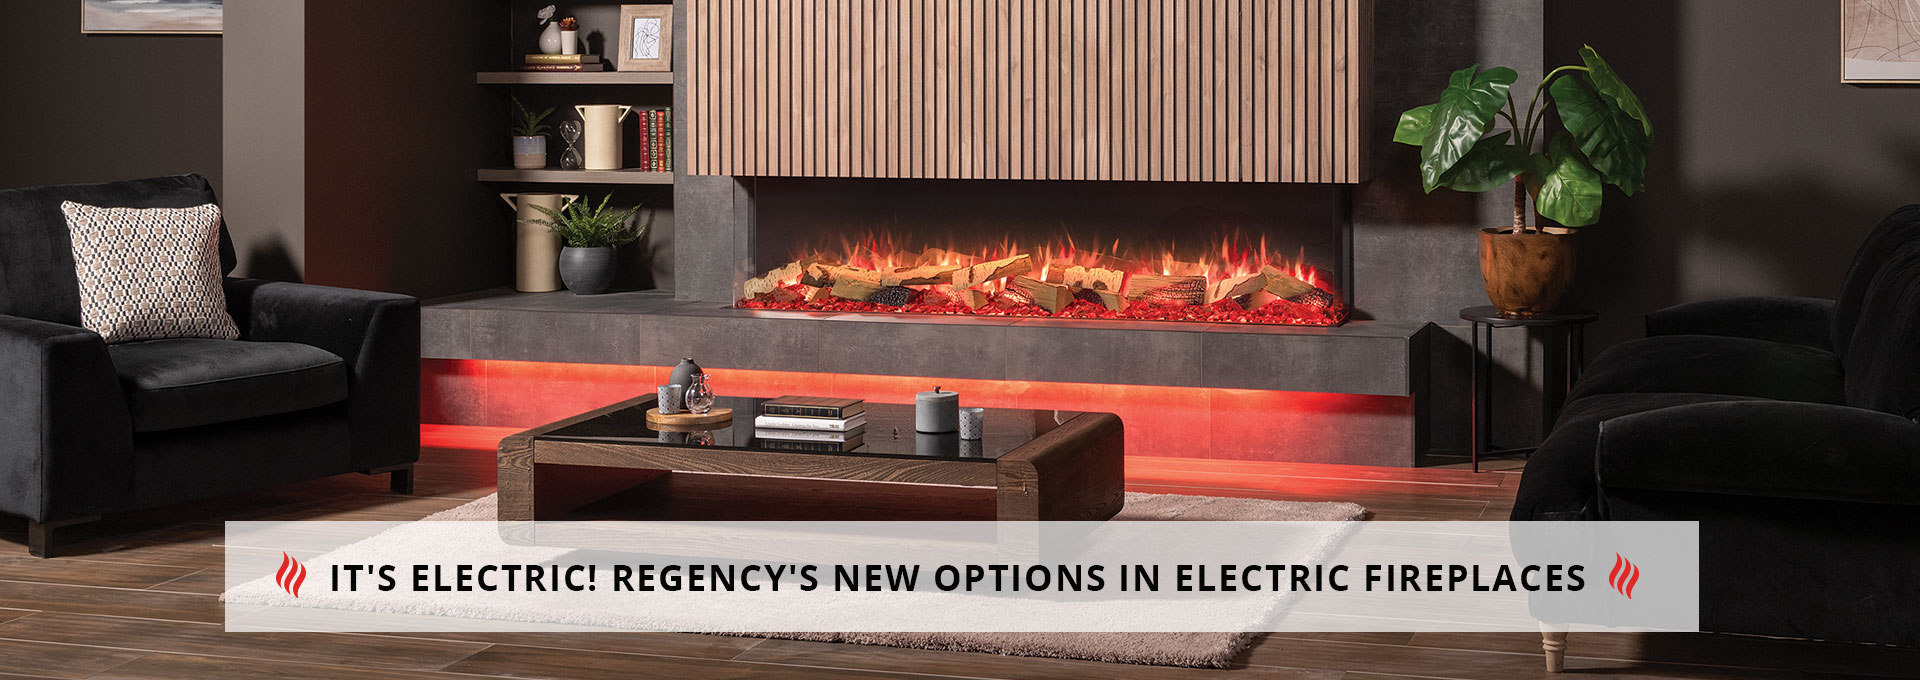 It's Electric! Regency's New Options in Electric Fireplaces 